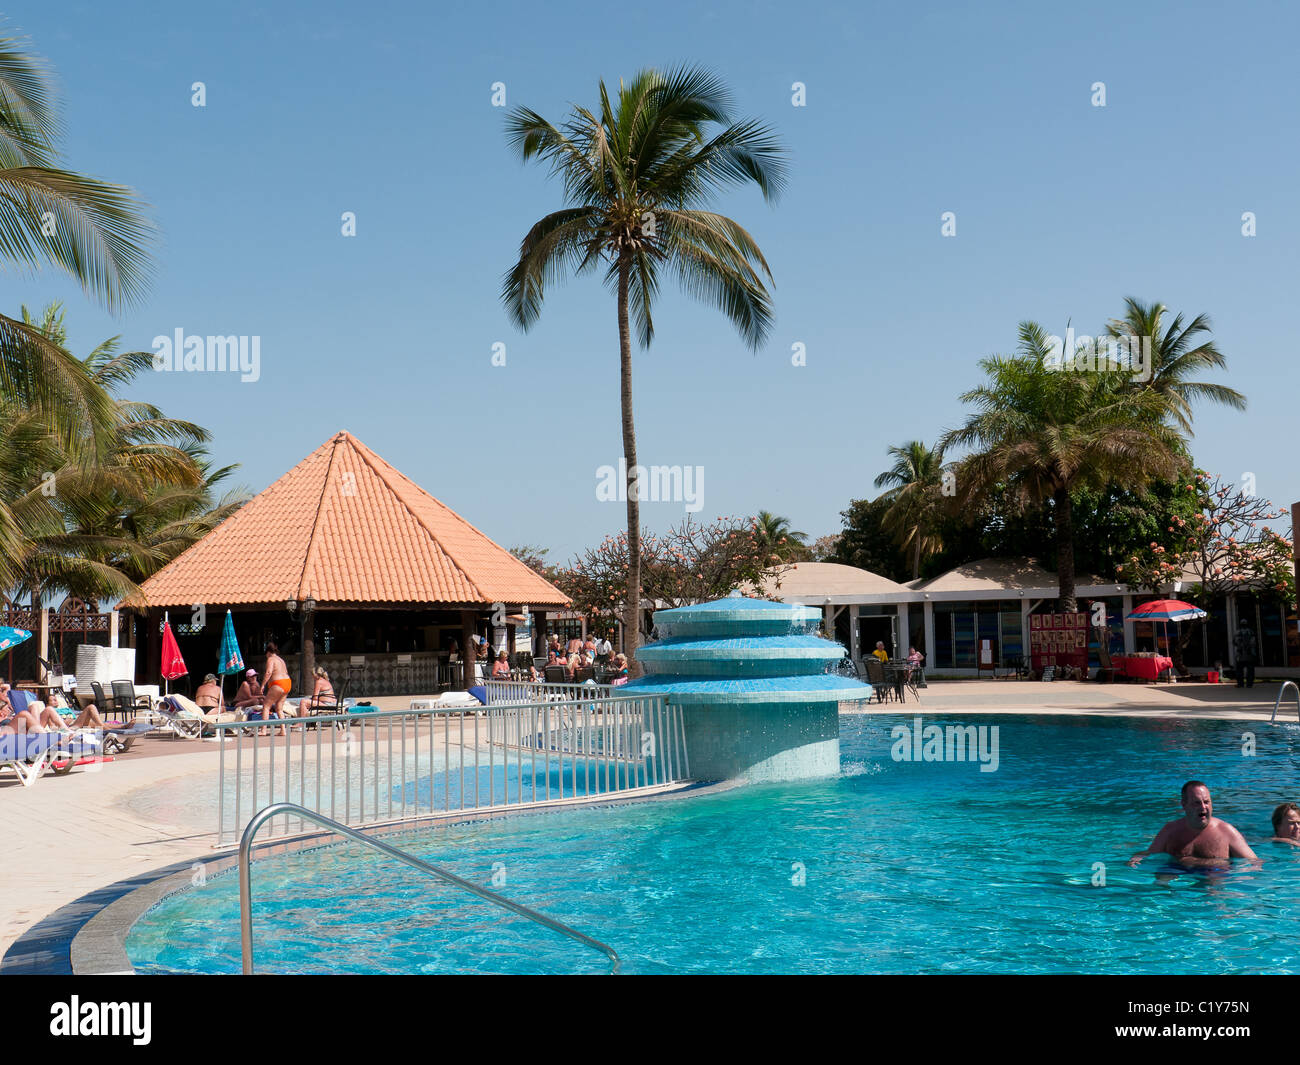 The pool area and sunbeds of the Atlantic Hotel in Banjul, The Gambia, West Africa Stock Photo